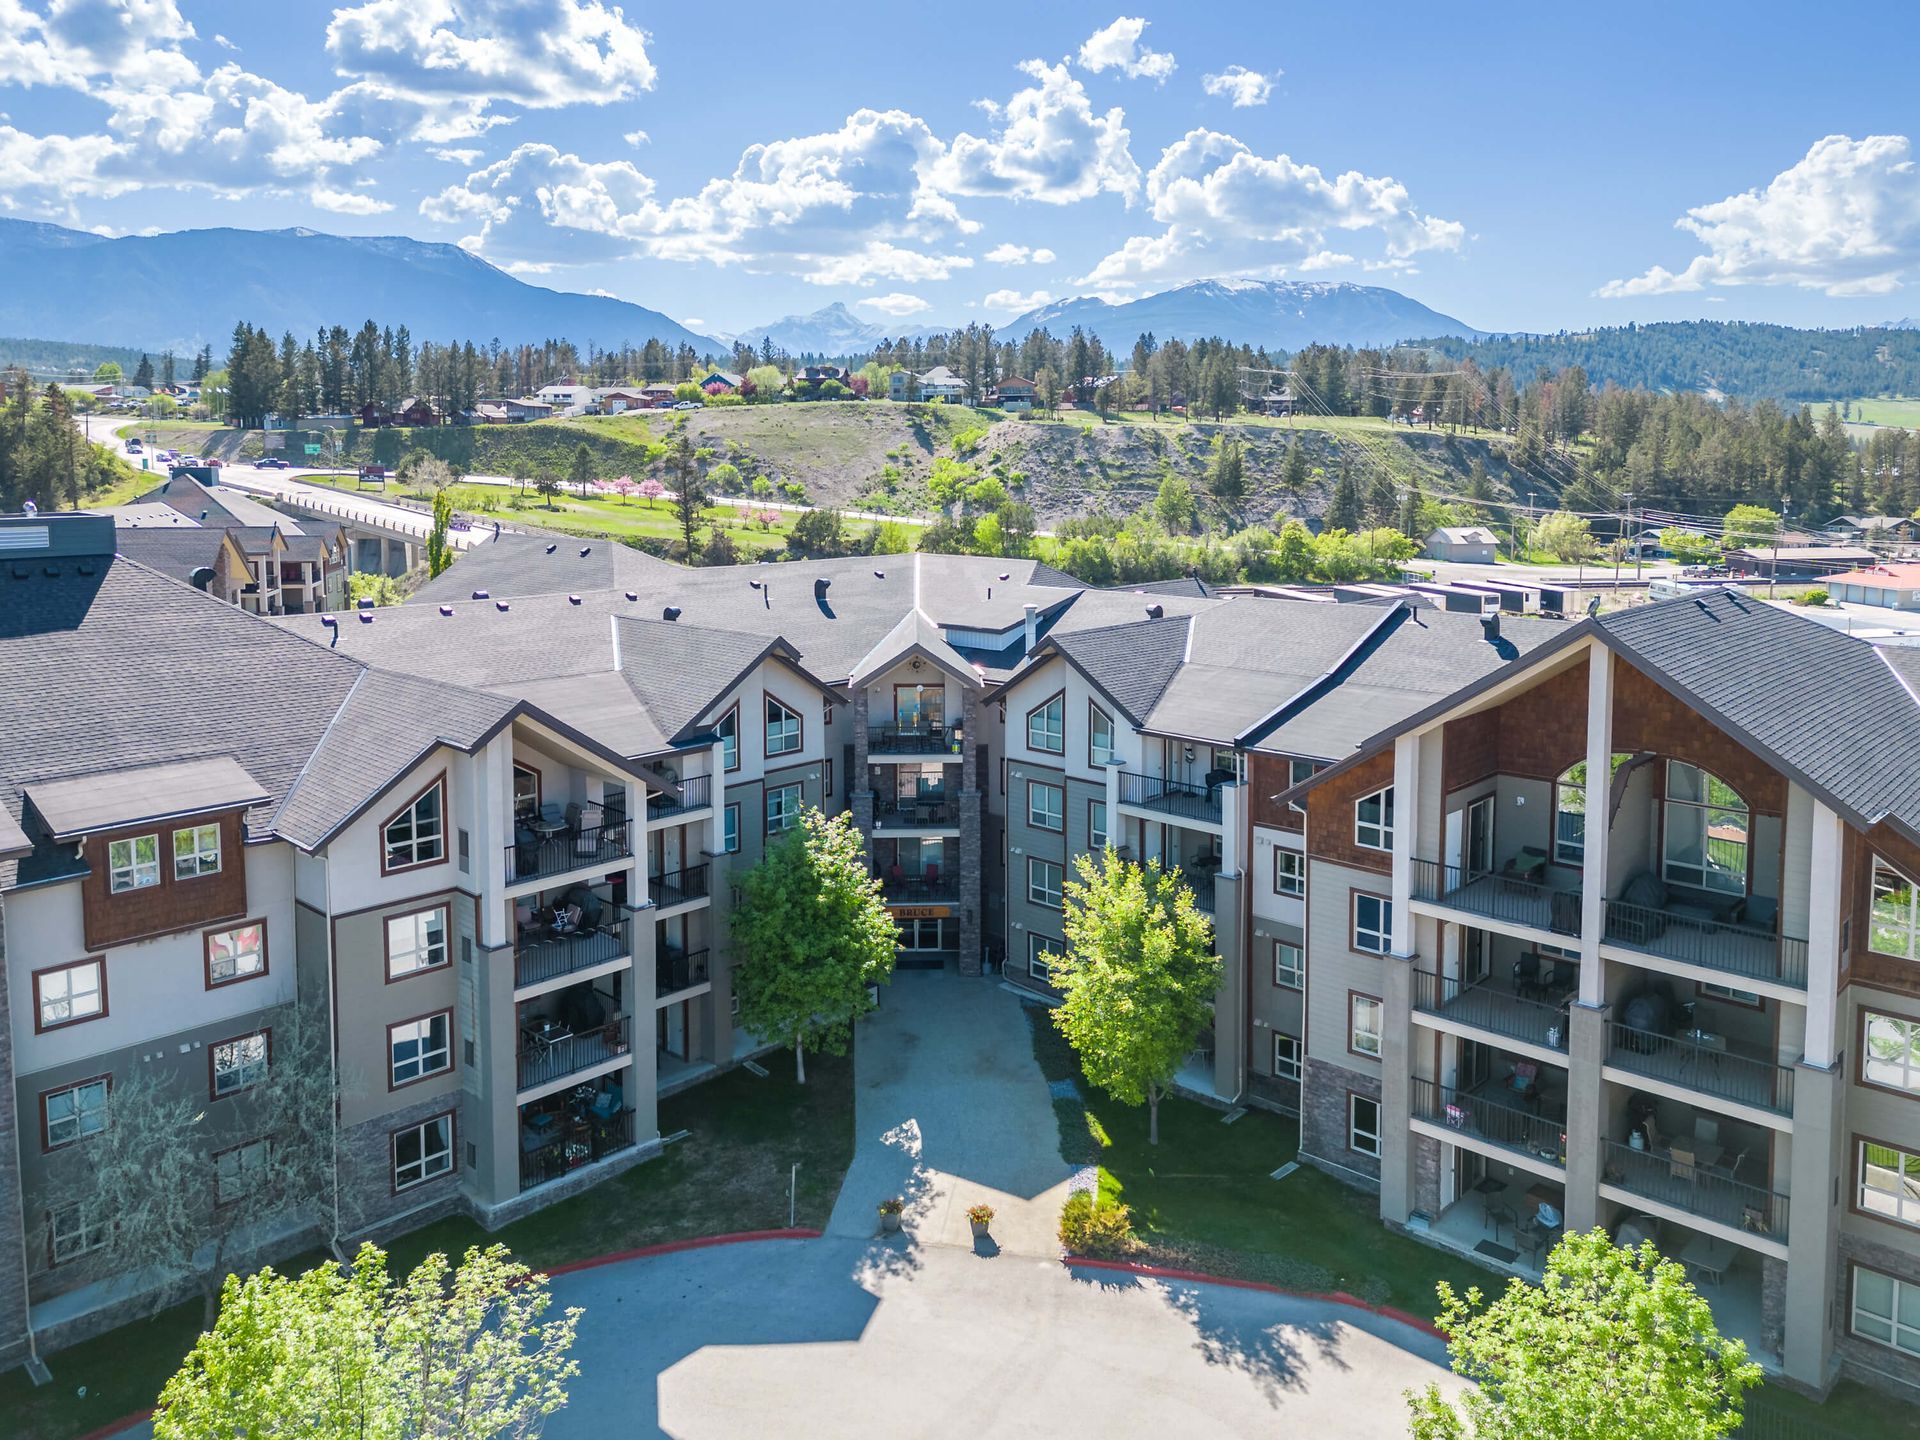 Exterior property view of the Stylish condo of Lake Windermere Pointe in Invermere, a BC Vacation Rental hosted by Aisling Baile Property Management.